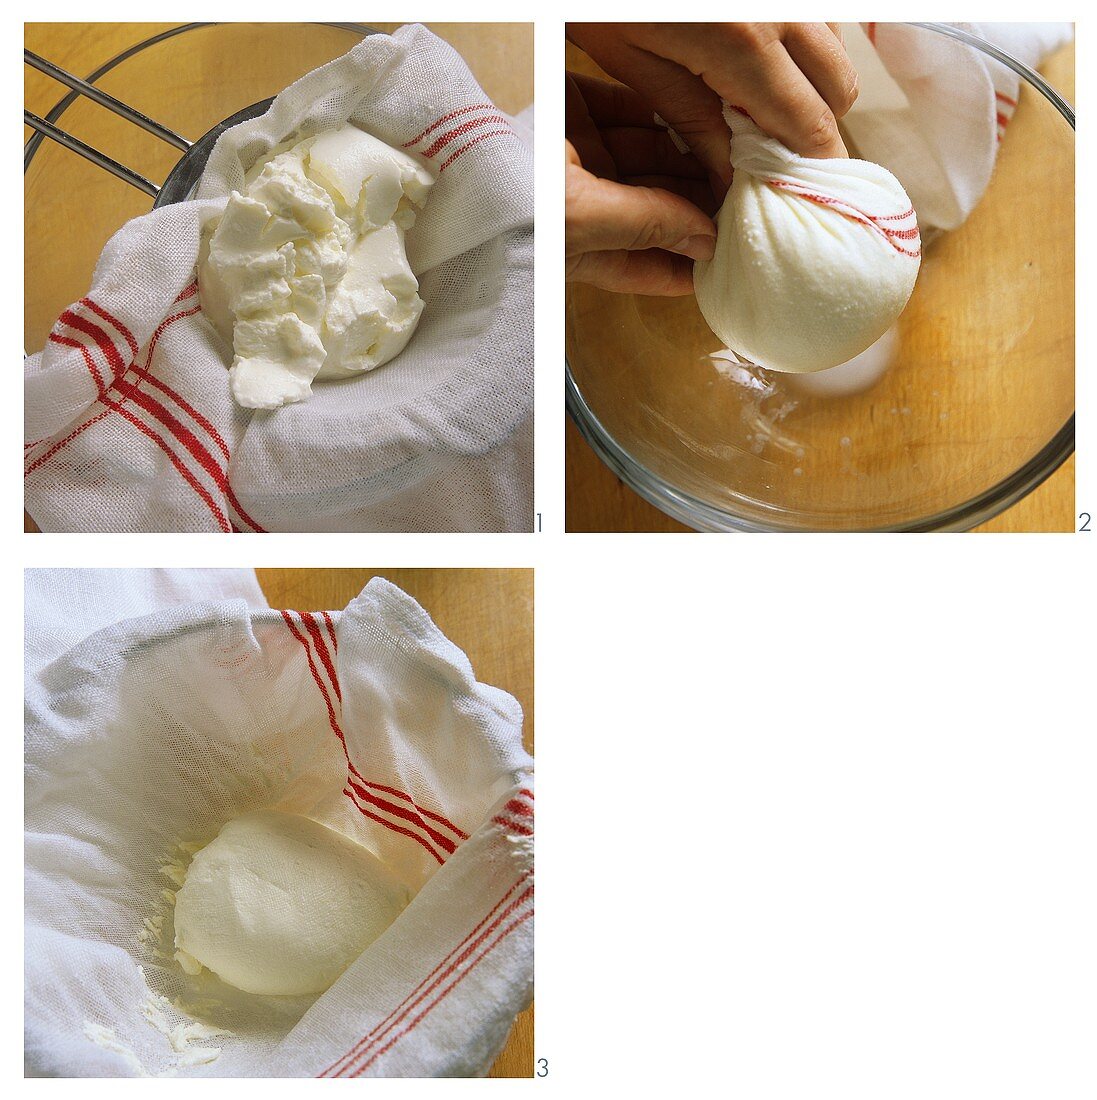 Making quark oil pastry (squeezing out the quark)